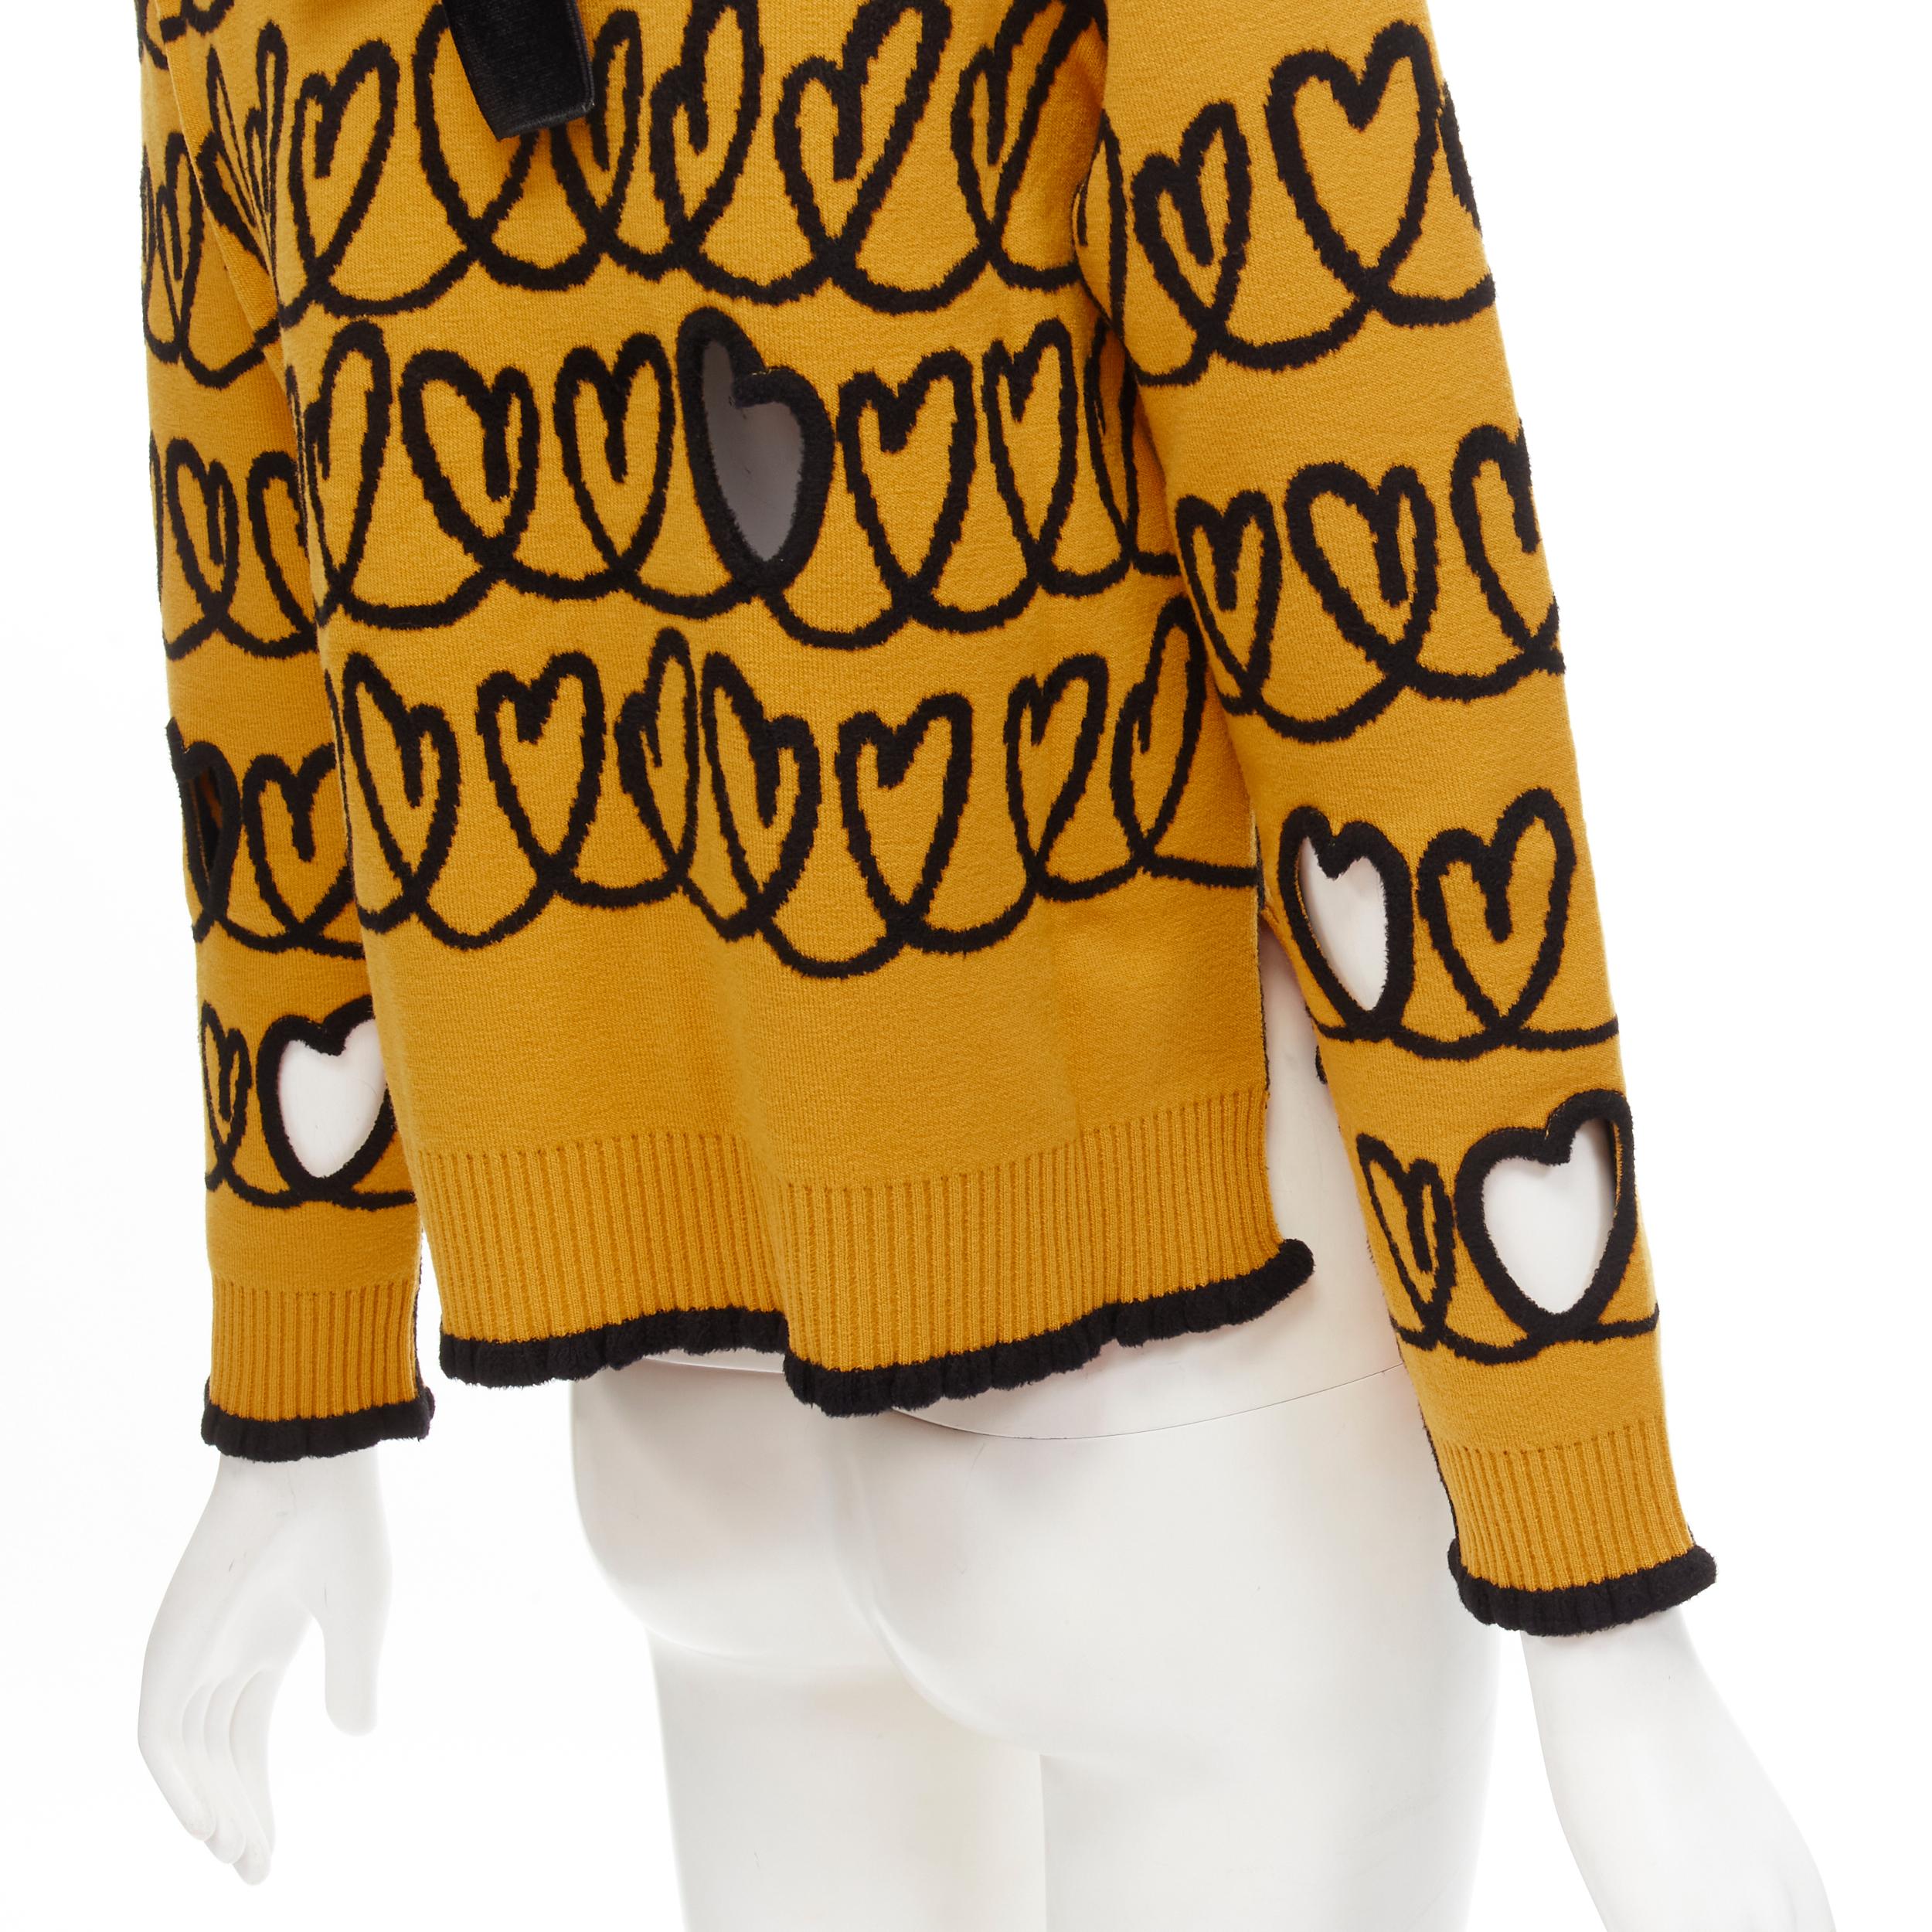 FENDI Scribble Heart cut out yellow black knit cropped pullover sweater S For Sale 1